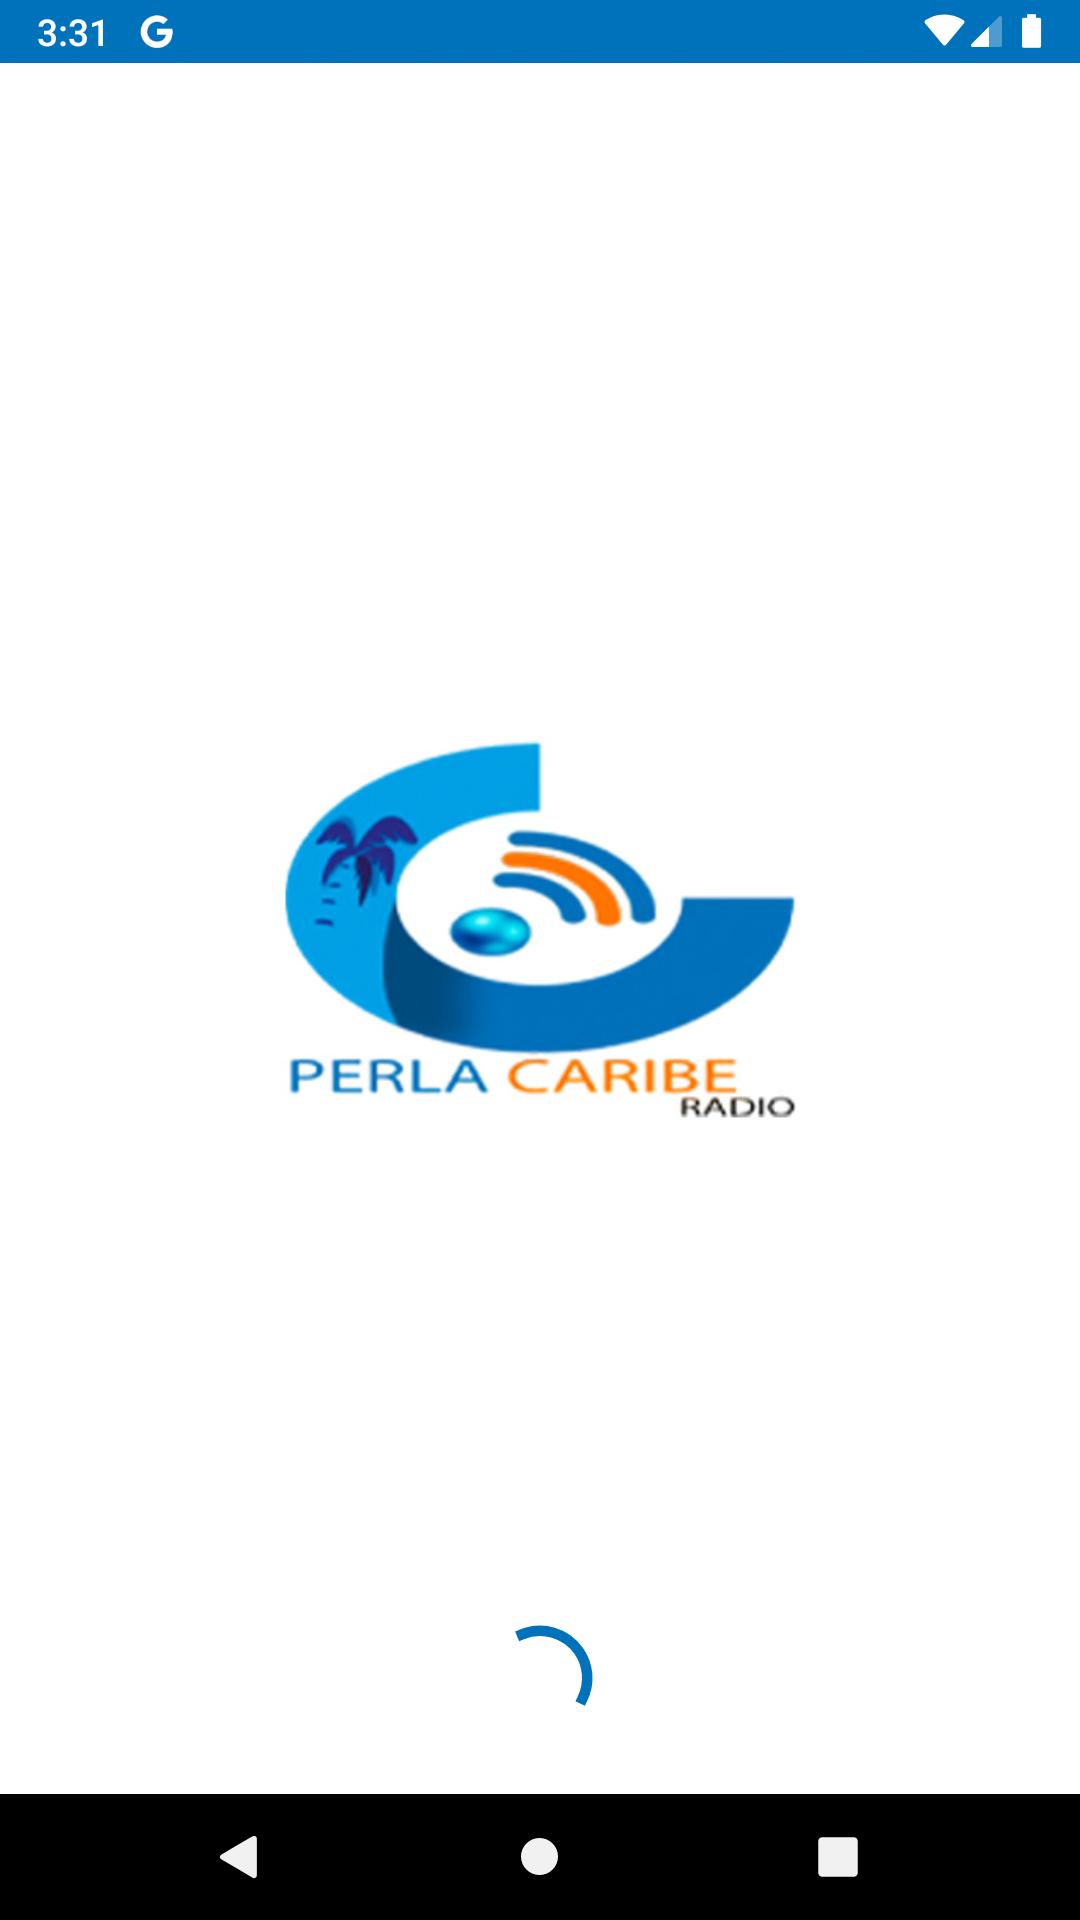 Perla Caribe Radio for Android - APK Download